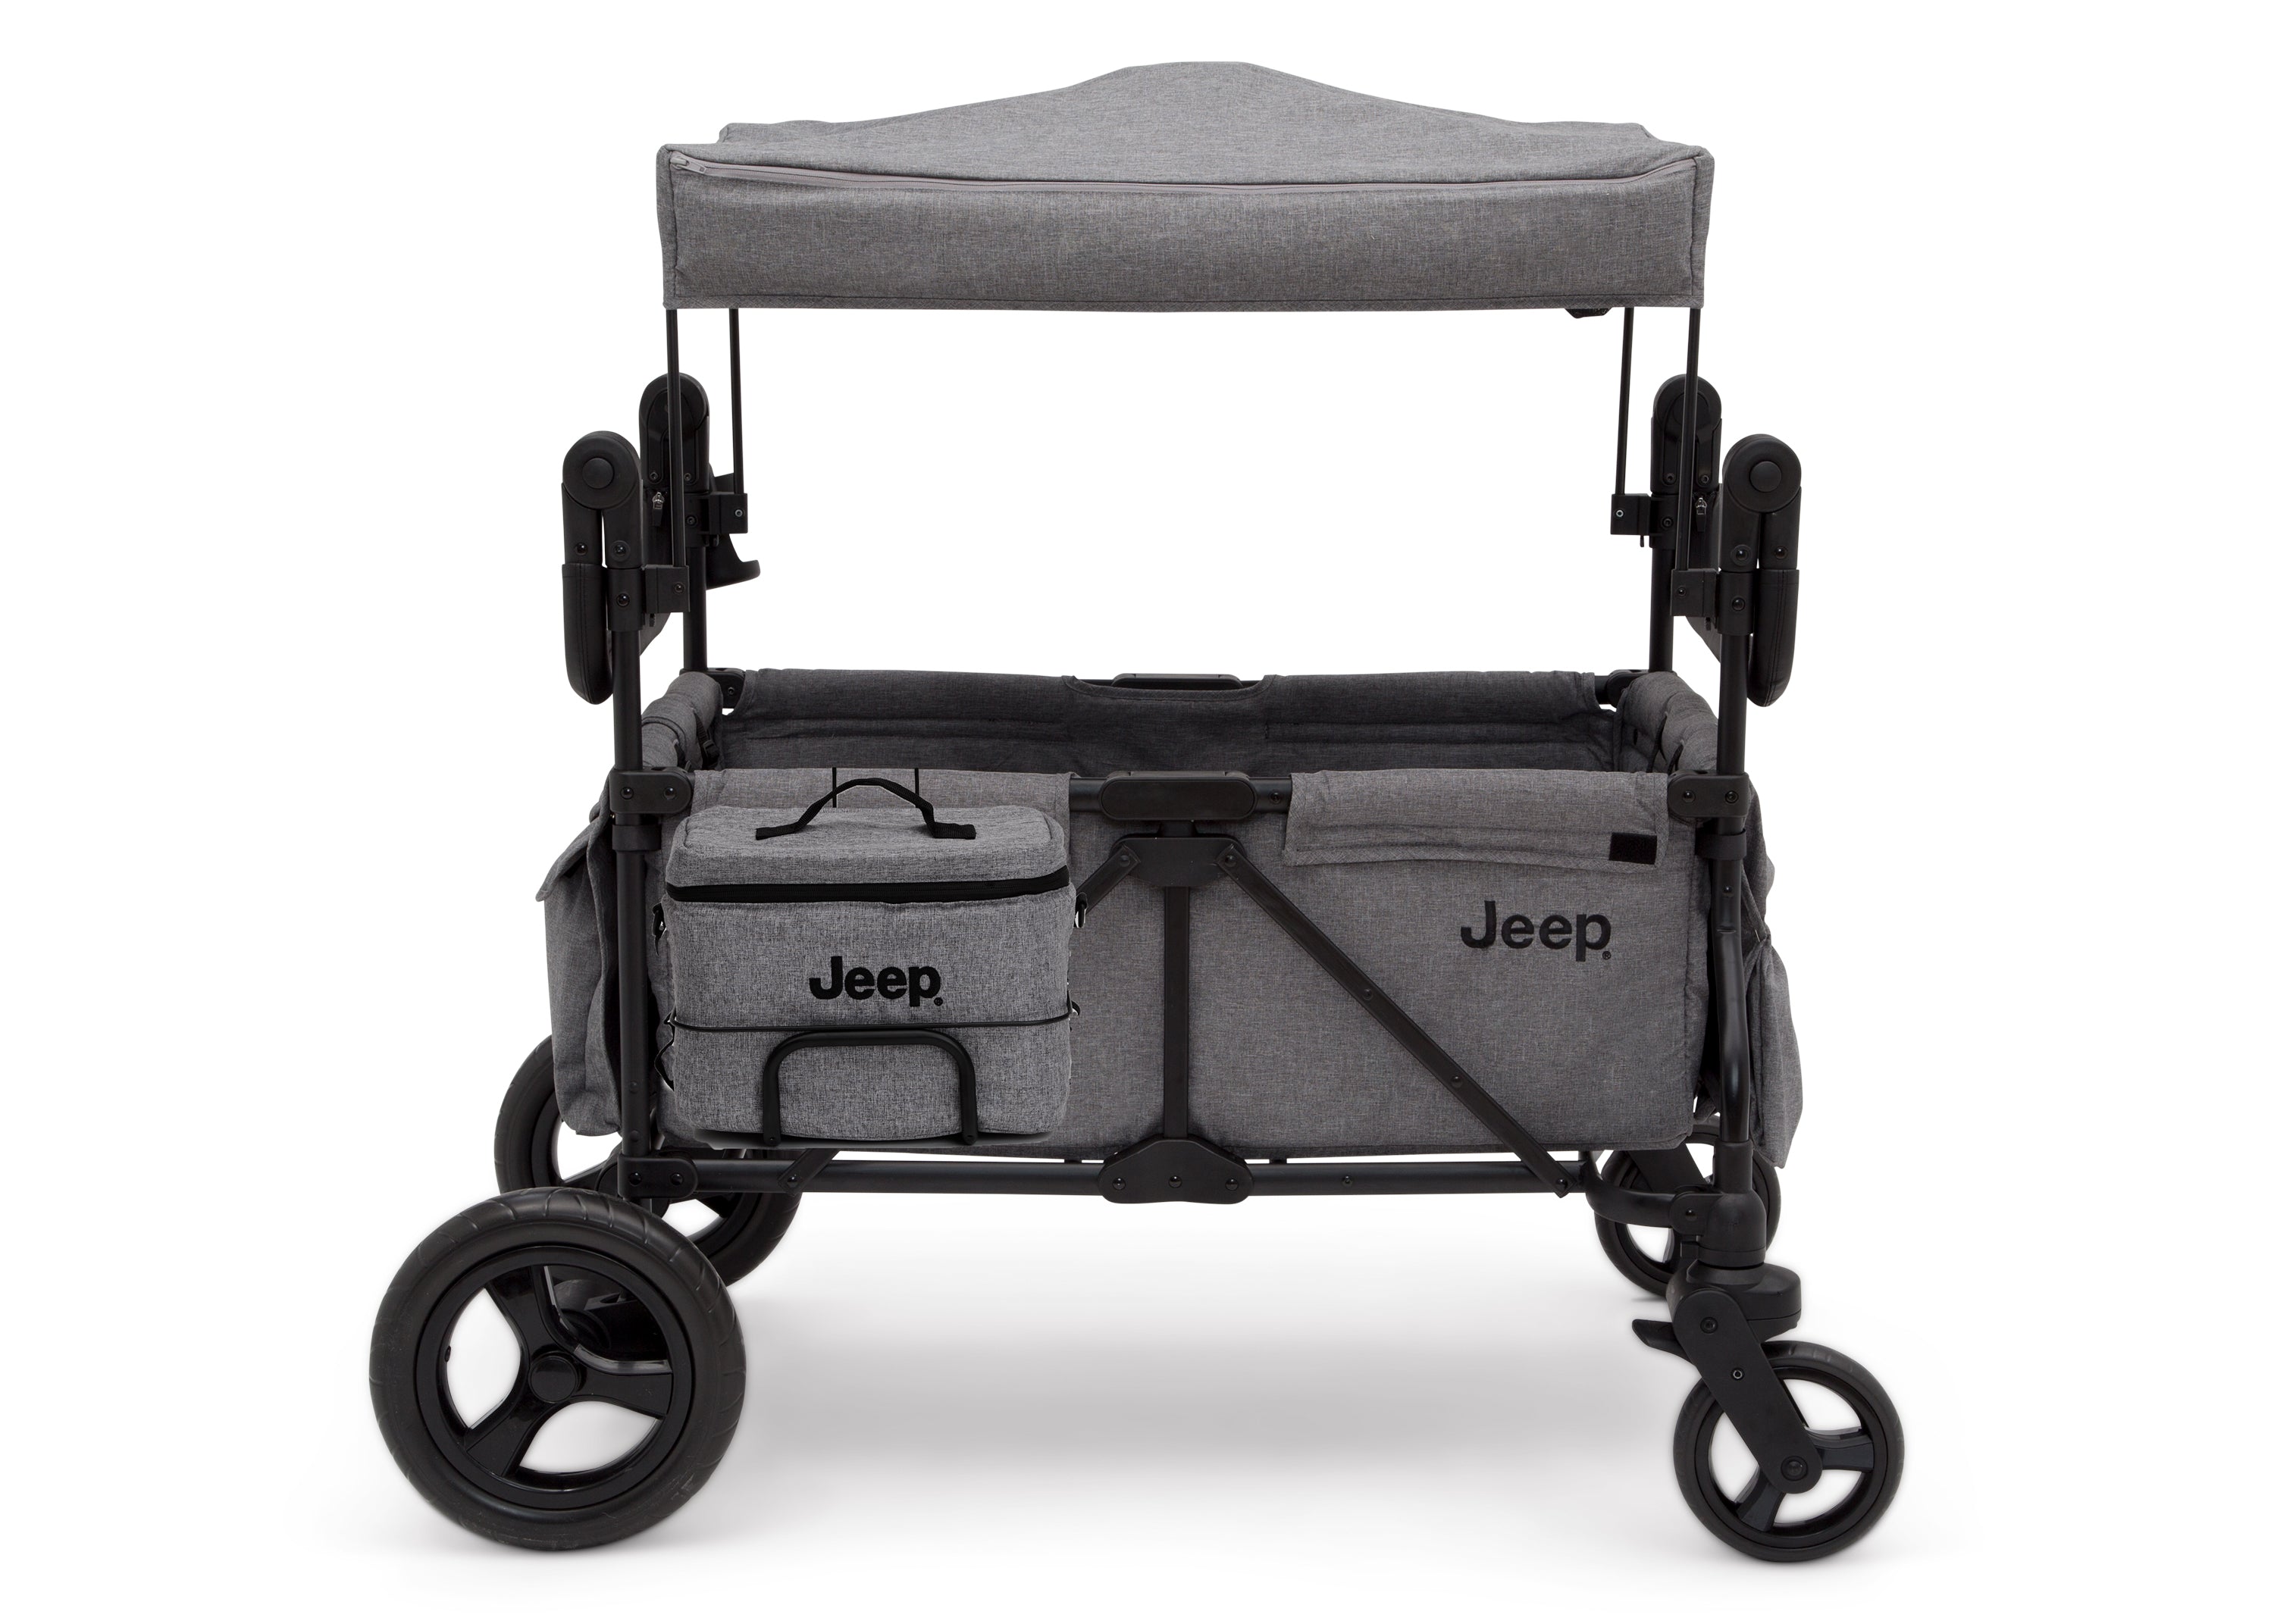 Jeep Wrangler Cooler Bag and Frame by Delta Children (Works with Jeep